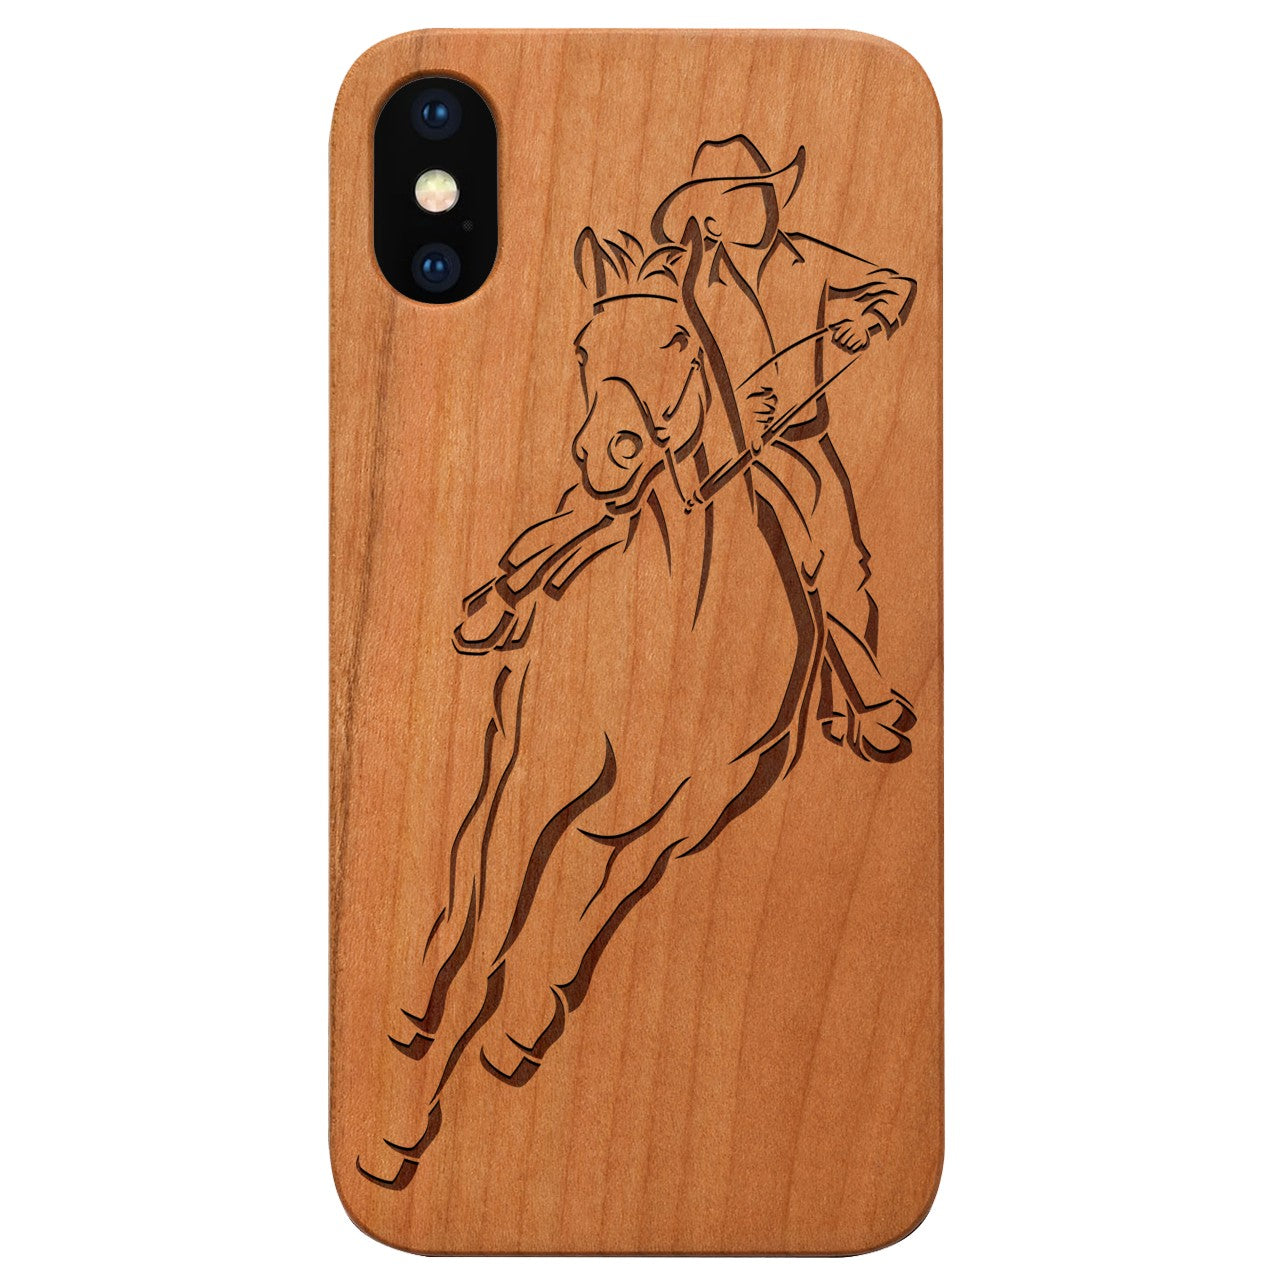  Cowboy 4 - Engraved - Wooden Phone Case - IPhone 13 Models